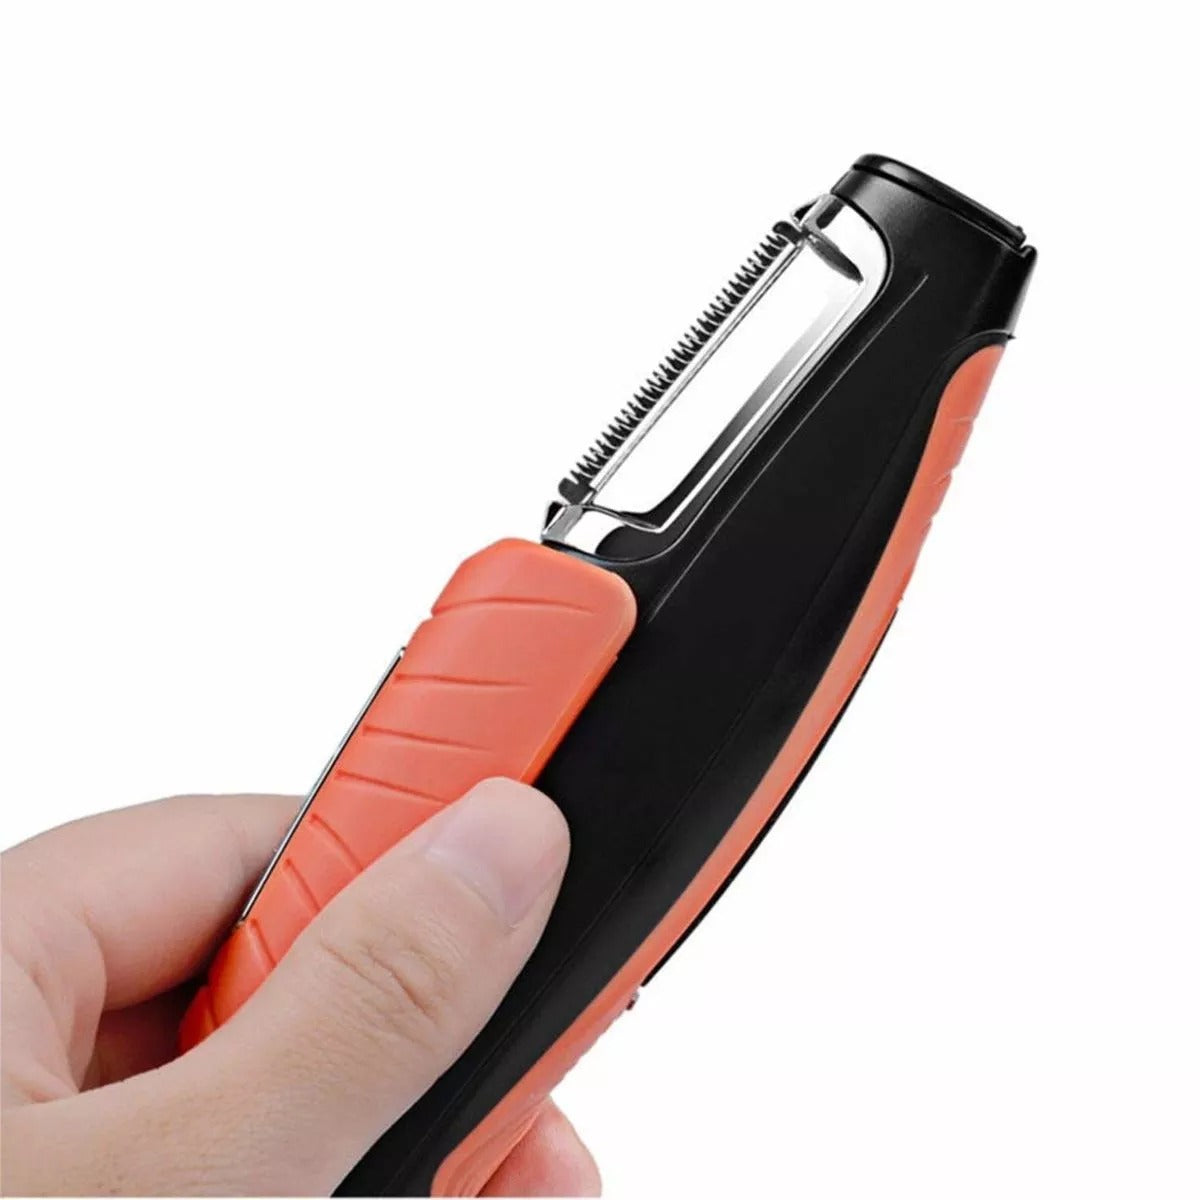 All In One Nose And Ear Hair Trimmer For Men